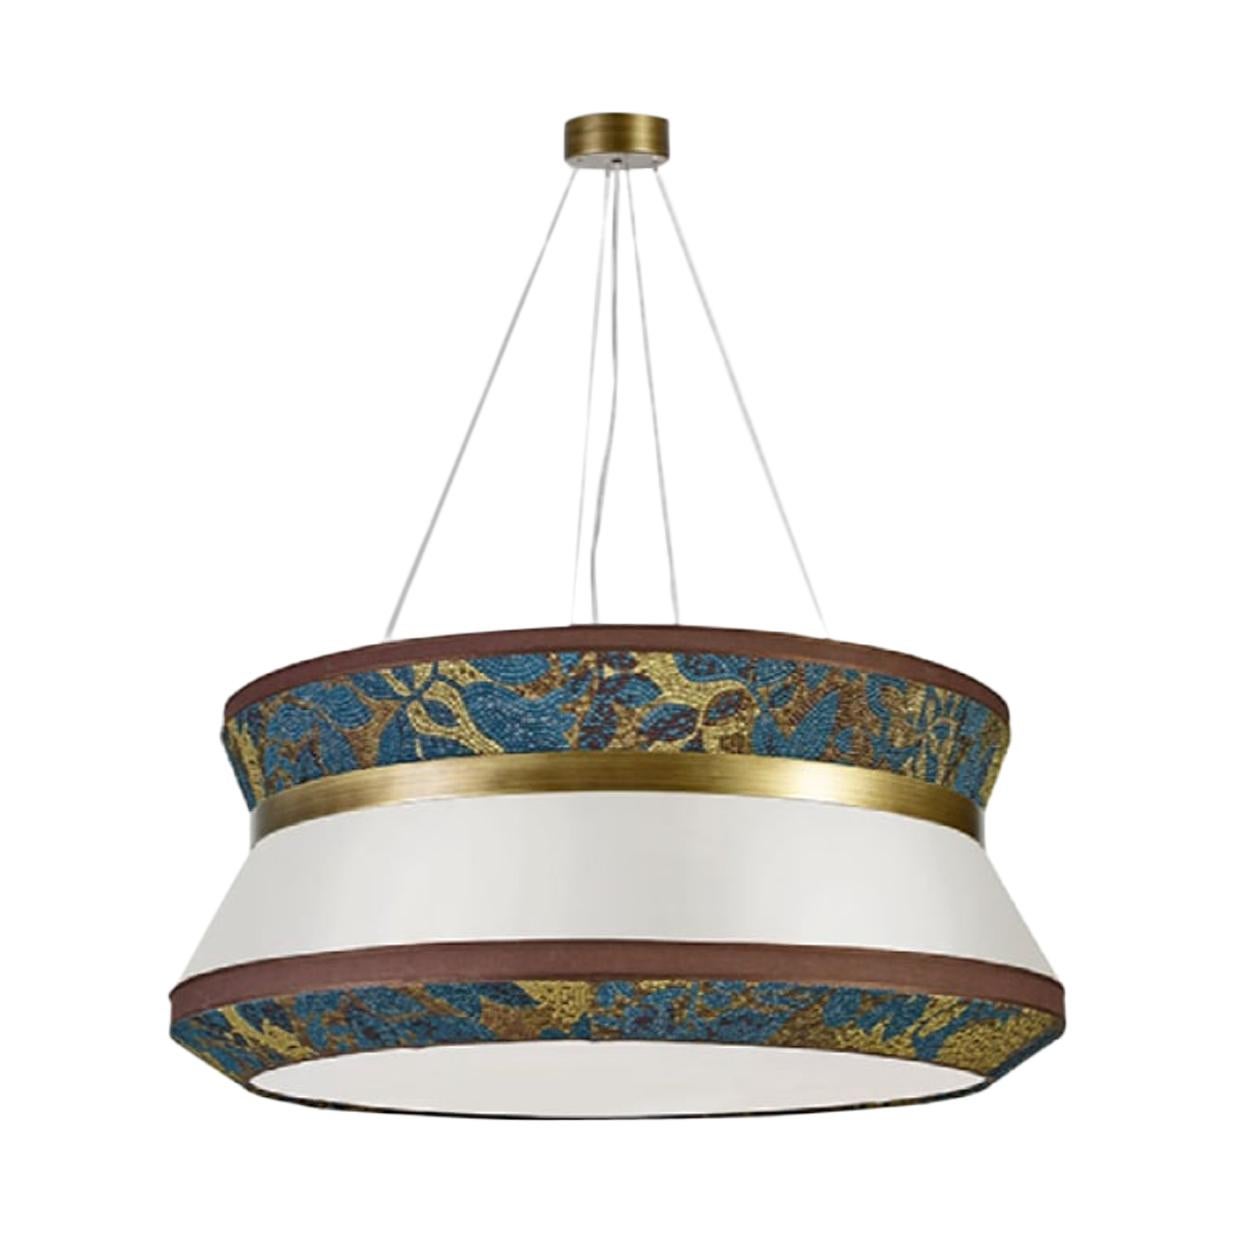 Stylish Ceiling Lamp with Shade in Fabric and Metal frame in Burnished Brass For Sale